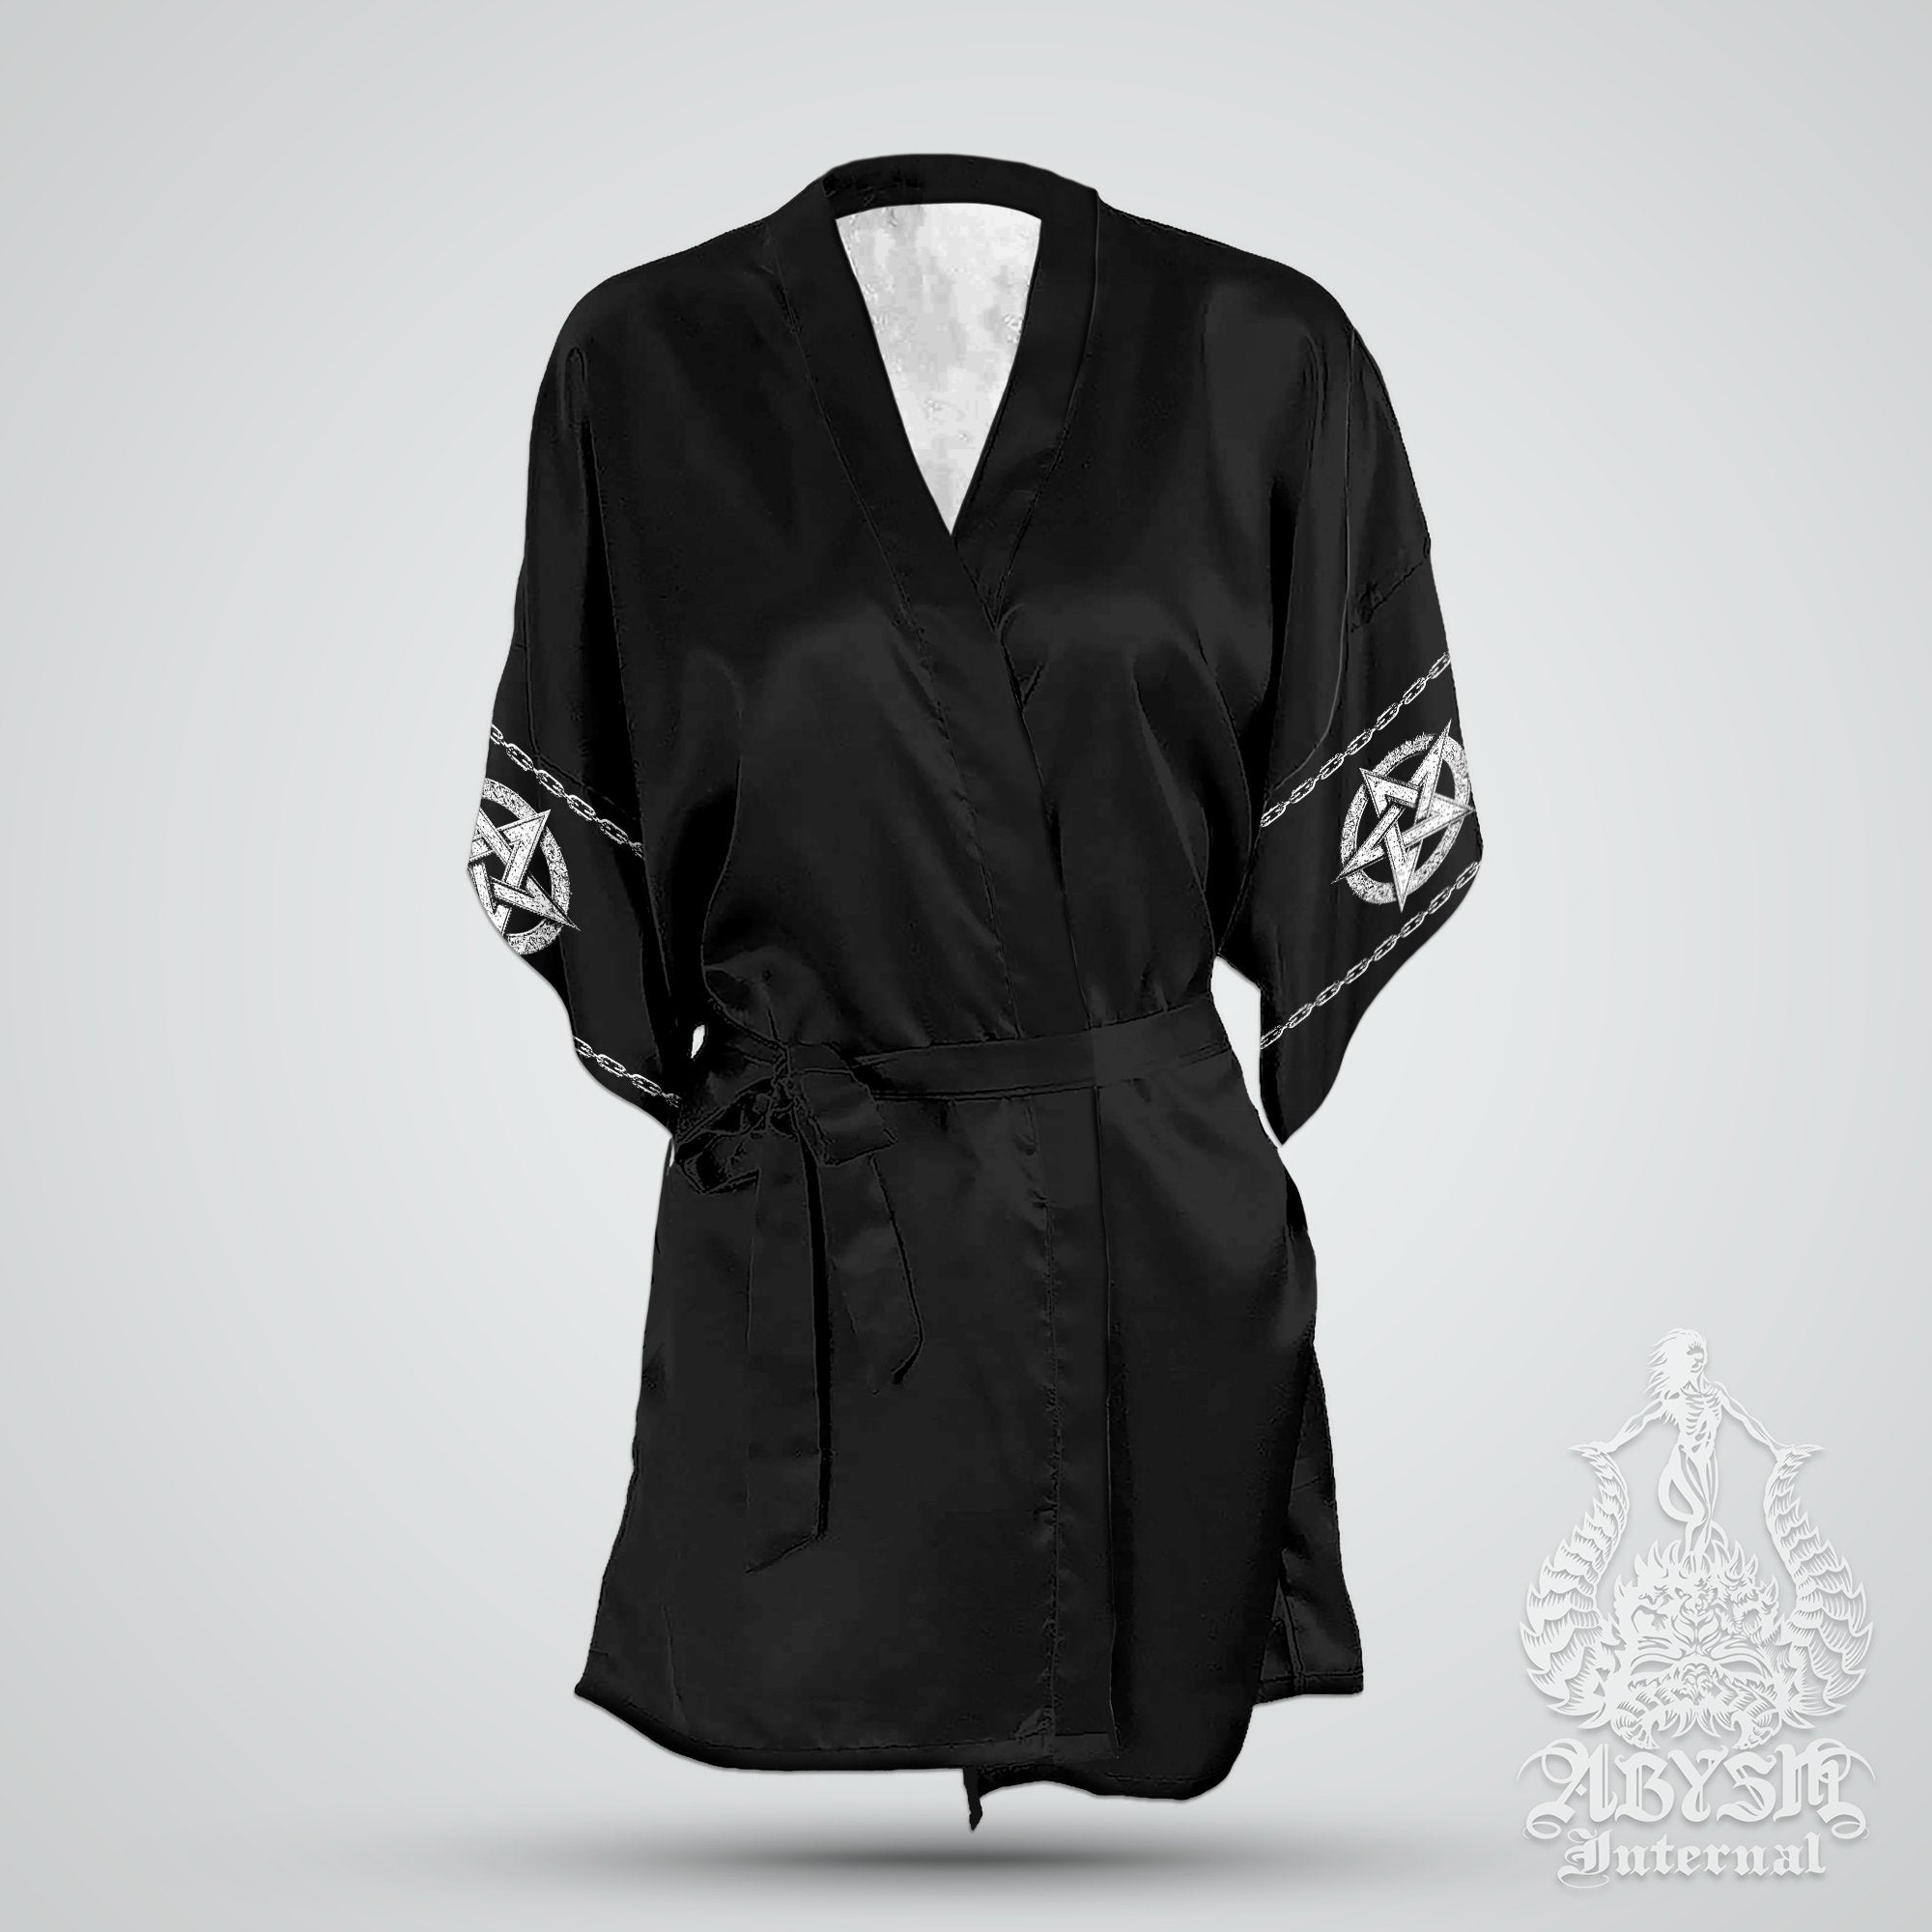 Satanic Cover Up, Beach Outfit, Party Kimono, Metal Summer Festival Robe, Demon, Alternative Clothing, Unisex - Goth Hell, The Devil - Abysm Internal